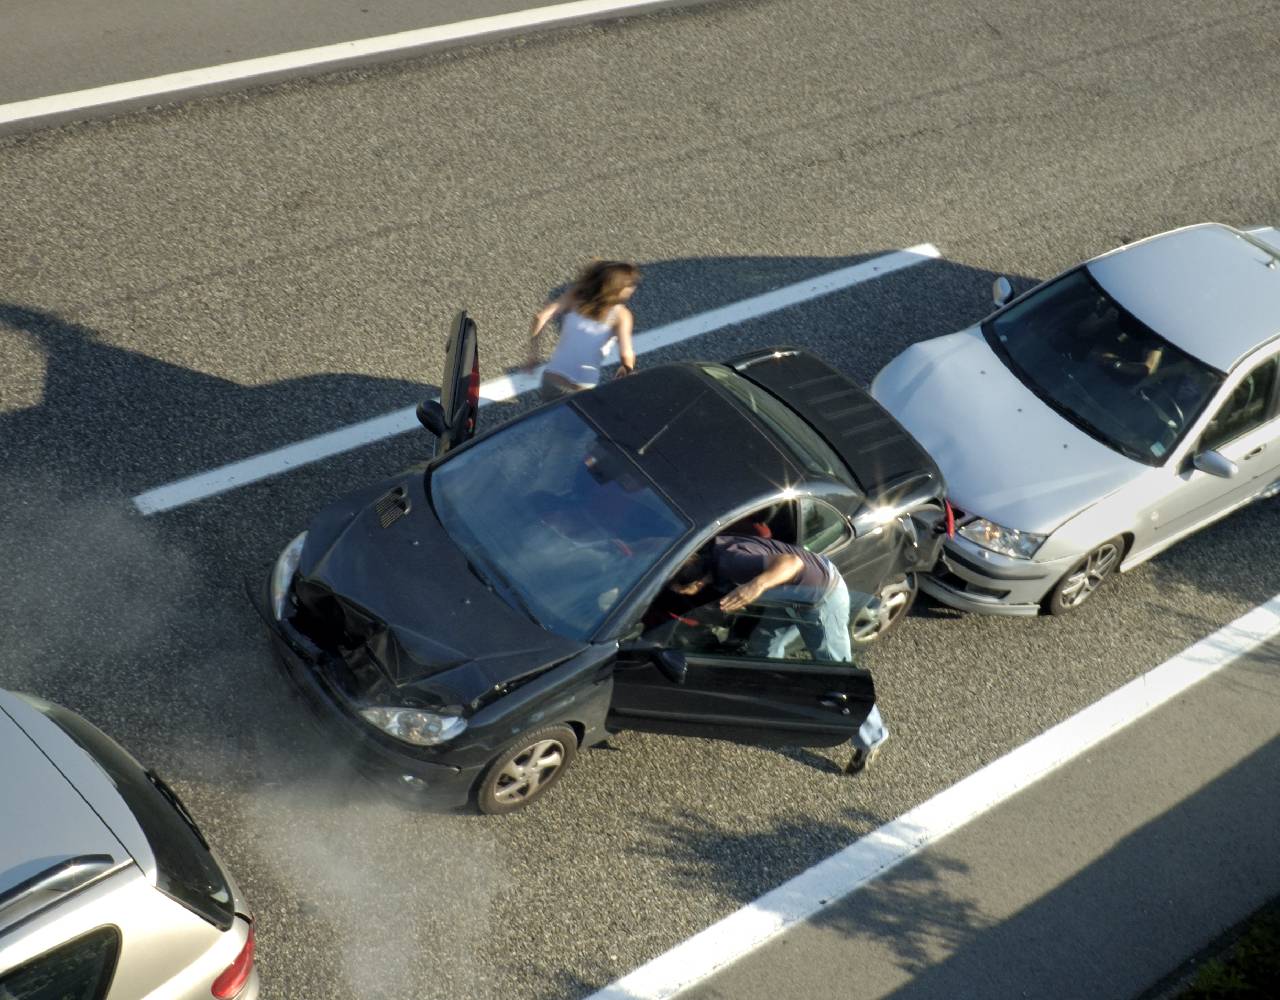 What Are the Types of Car Accidents?